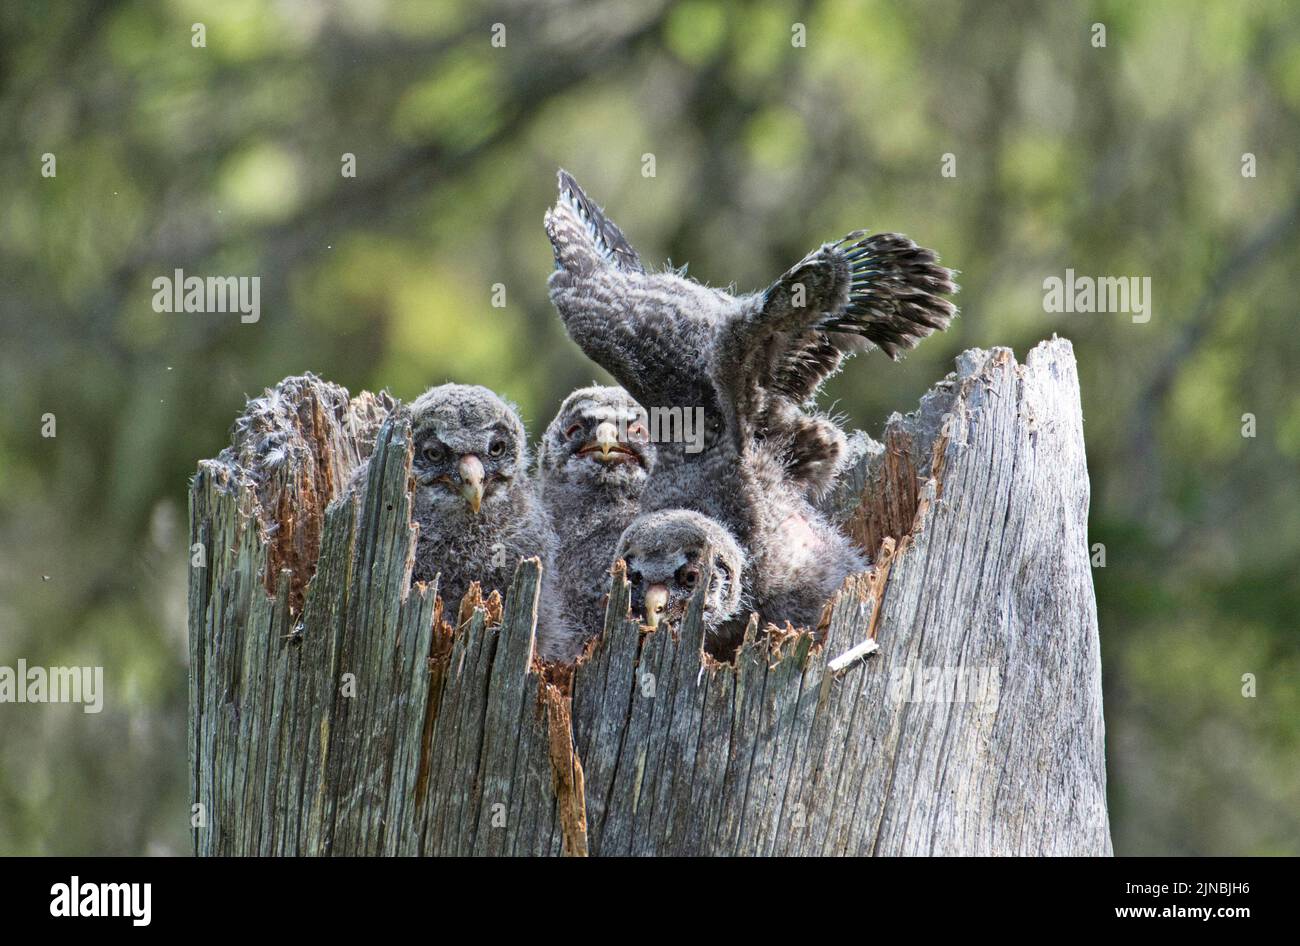 Nest and young of a great grey owl (Strix nebulosa) in the broken trunk of a tree in the boreal forest or taiga of Finland Stock Photo